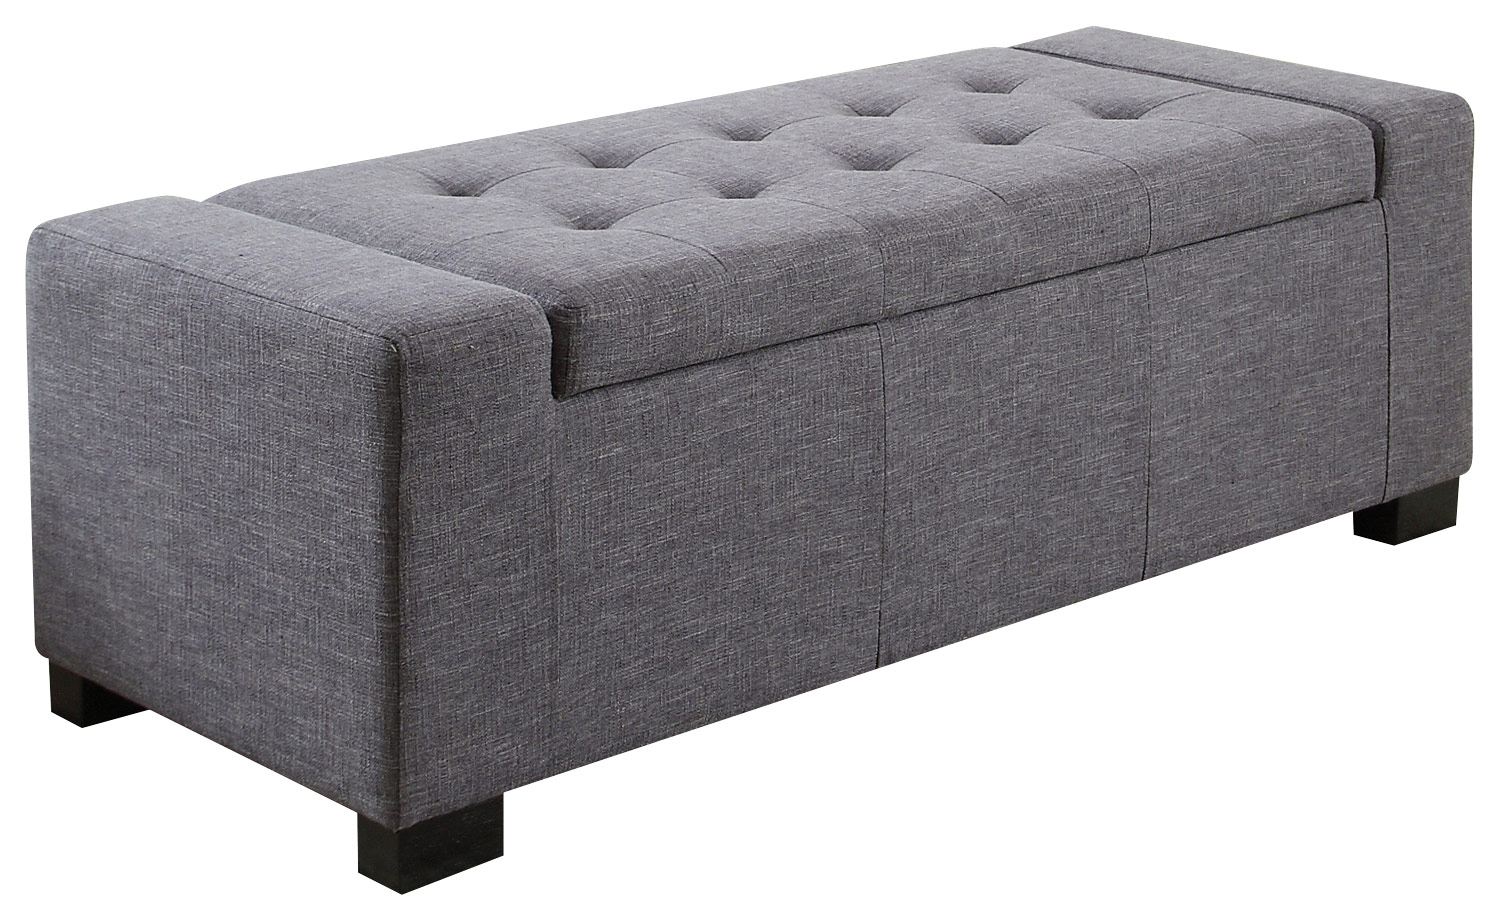 Simpli Home - Laredo Rectangular Polyester Bench Ottoman With Inner Storage - Slate Gray was $254.99 now $178.99 (30.0% off)